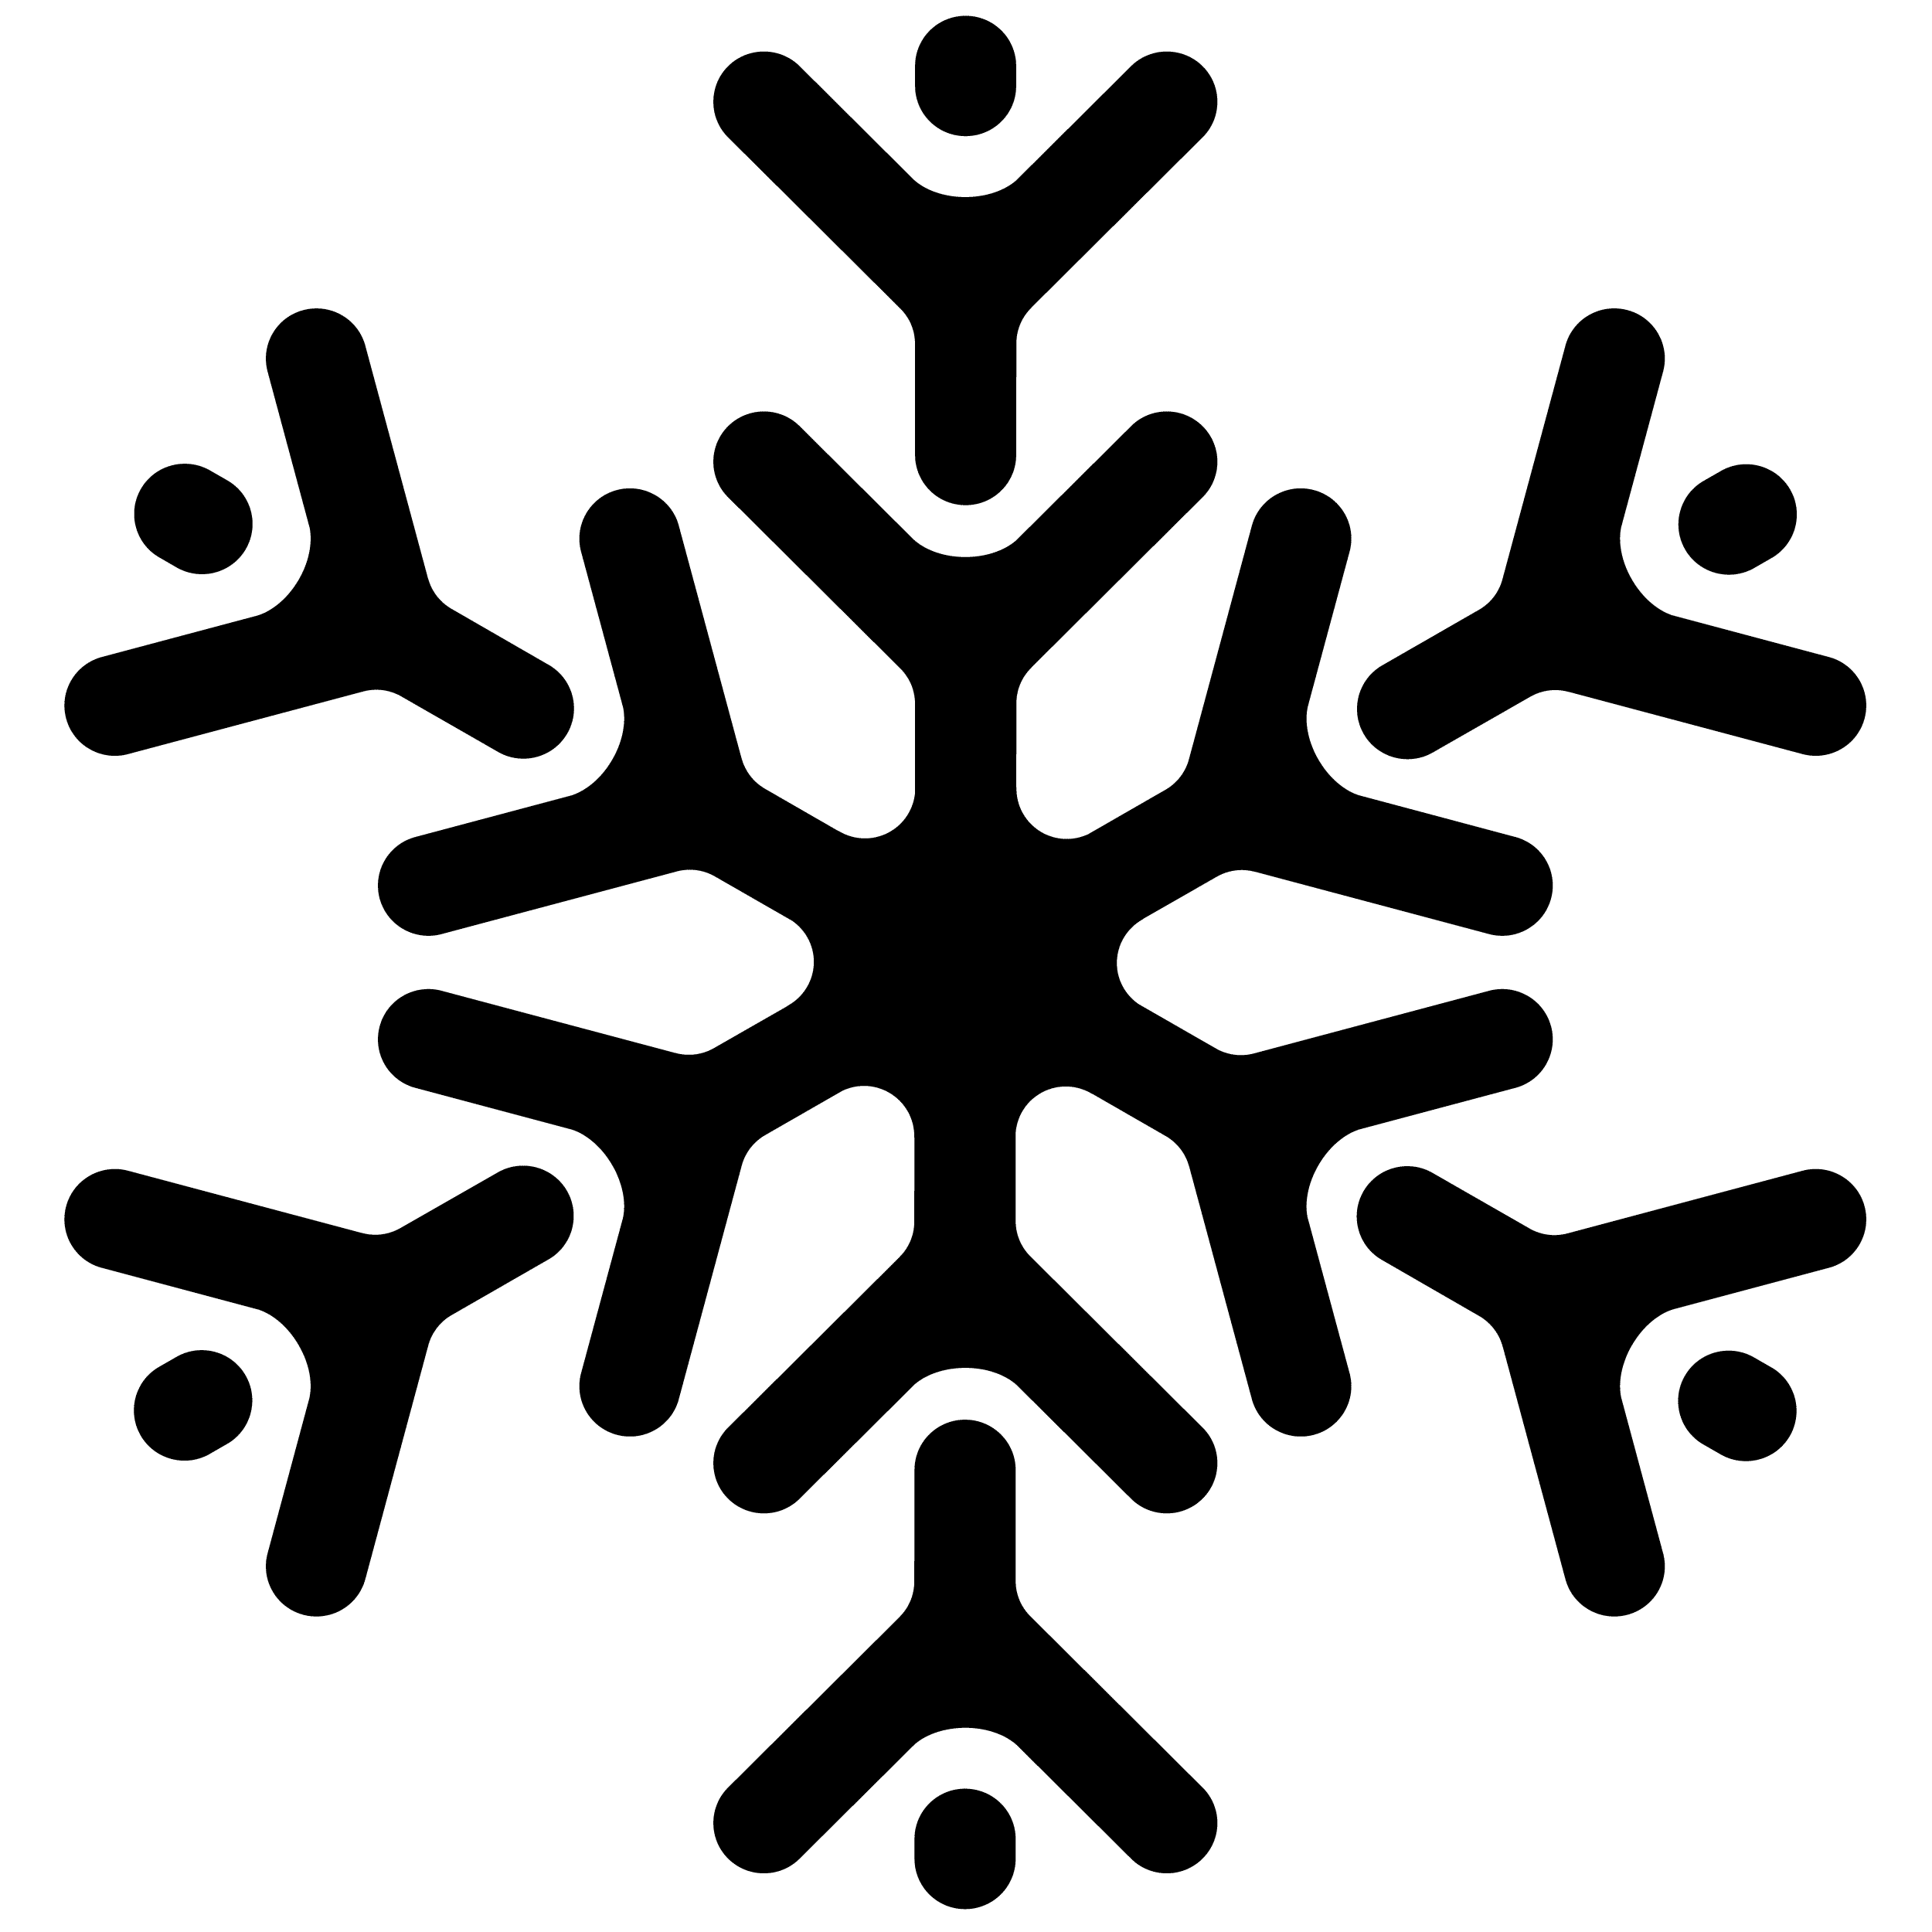 52 Snowflakes Vectors Silhouette And Photoshop Brushes For